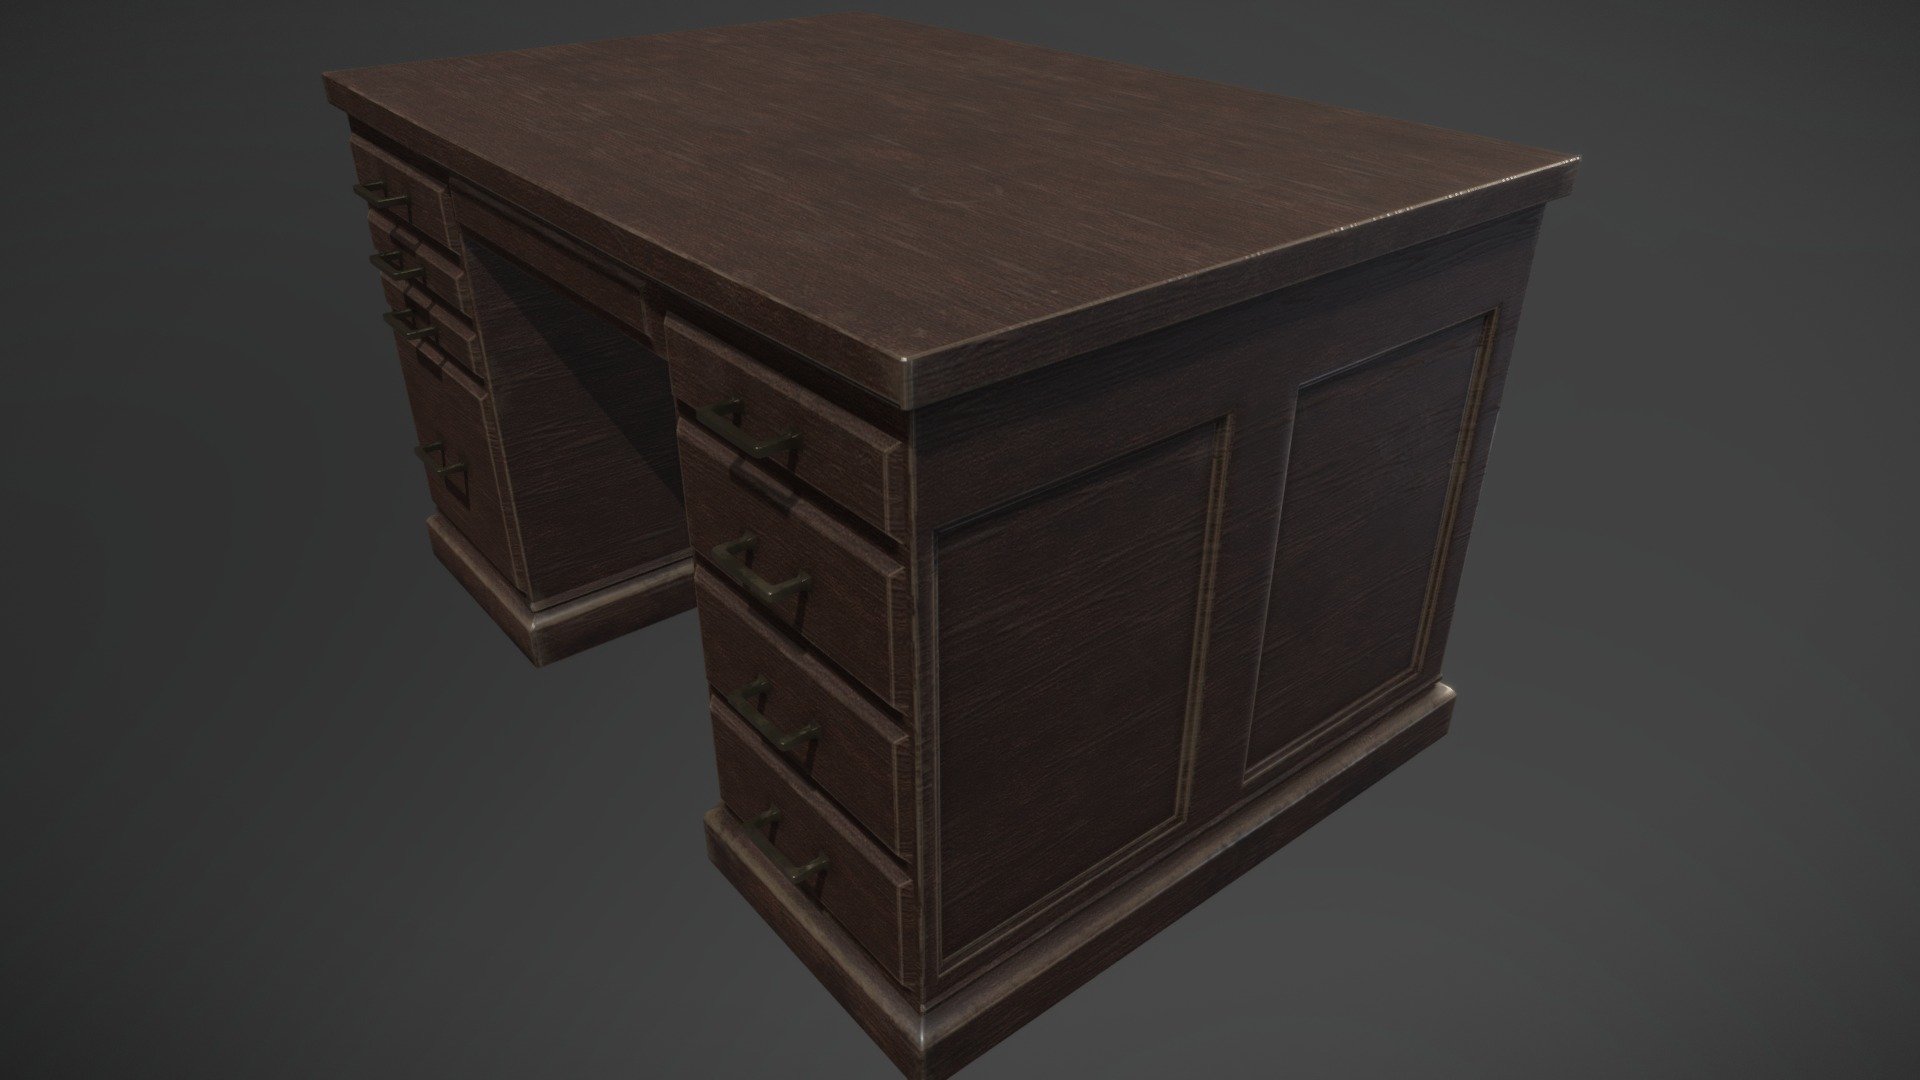 I am currently working on a still life table top project in my own free time, and also working on my Substance Painter skills. The desk is one of the first pieces of my scene. I tried to give it a worn old-timey look, but not make it too much either 3d model